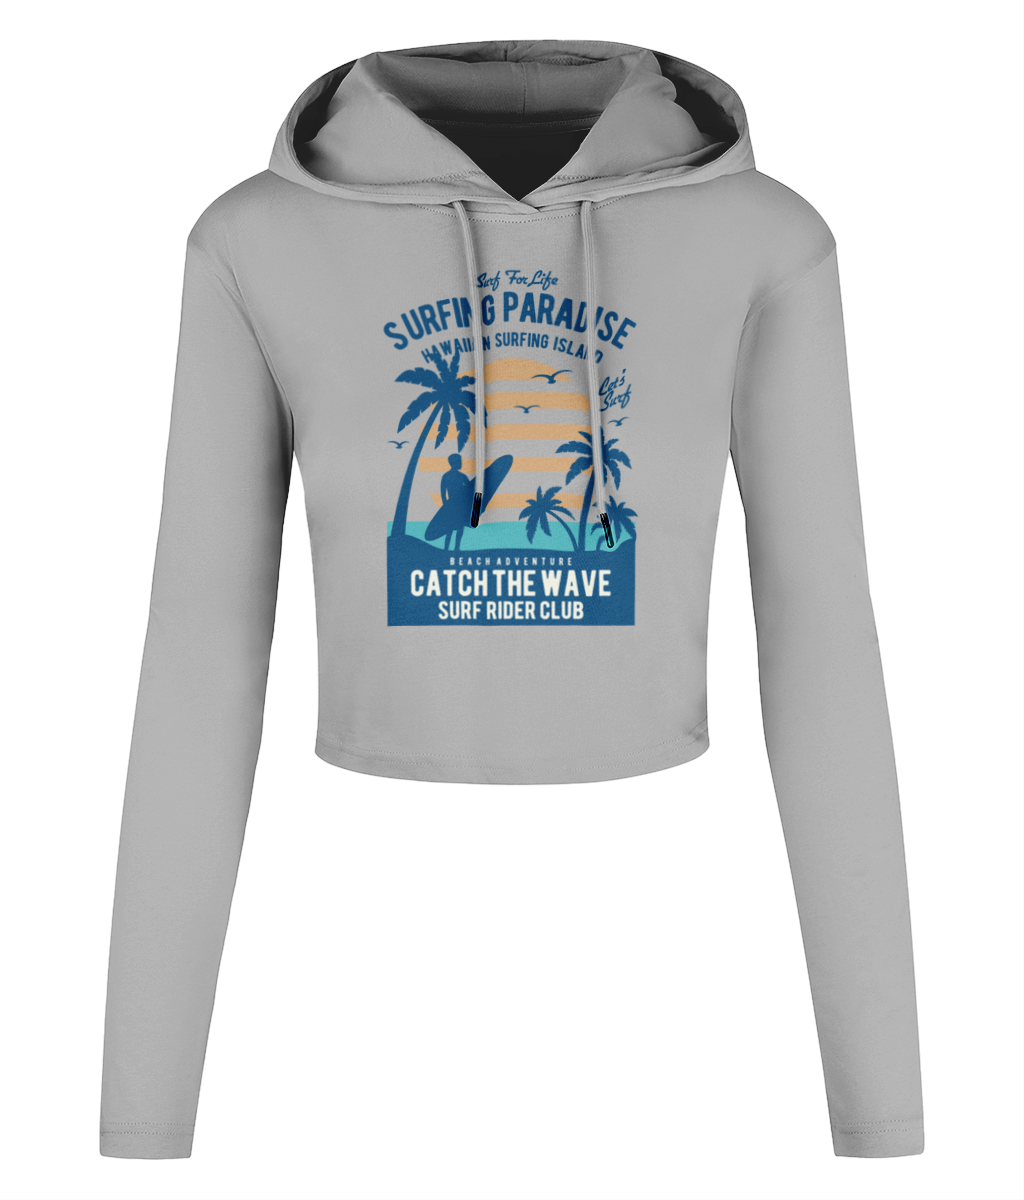 Surfing Paradise – Women’s Cropped Hooded T-shirt